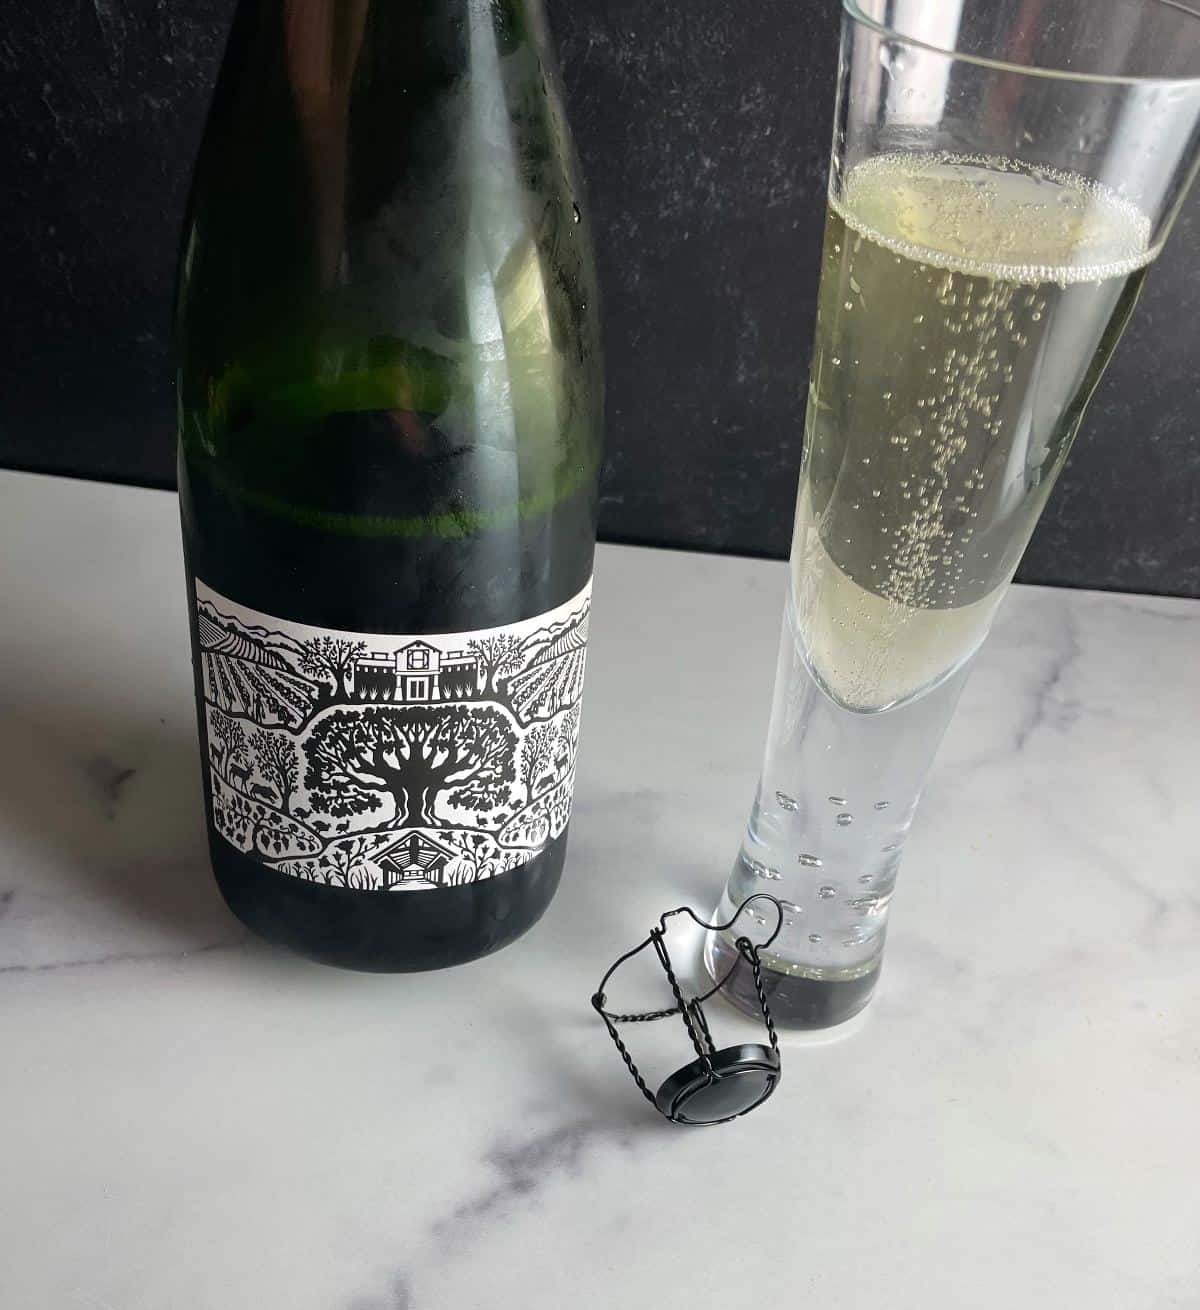 bottle and glass of Halter Ranch Libelle sparkling wine, showing the front of the bottle with a black and white version image of the estate.